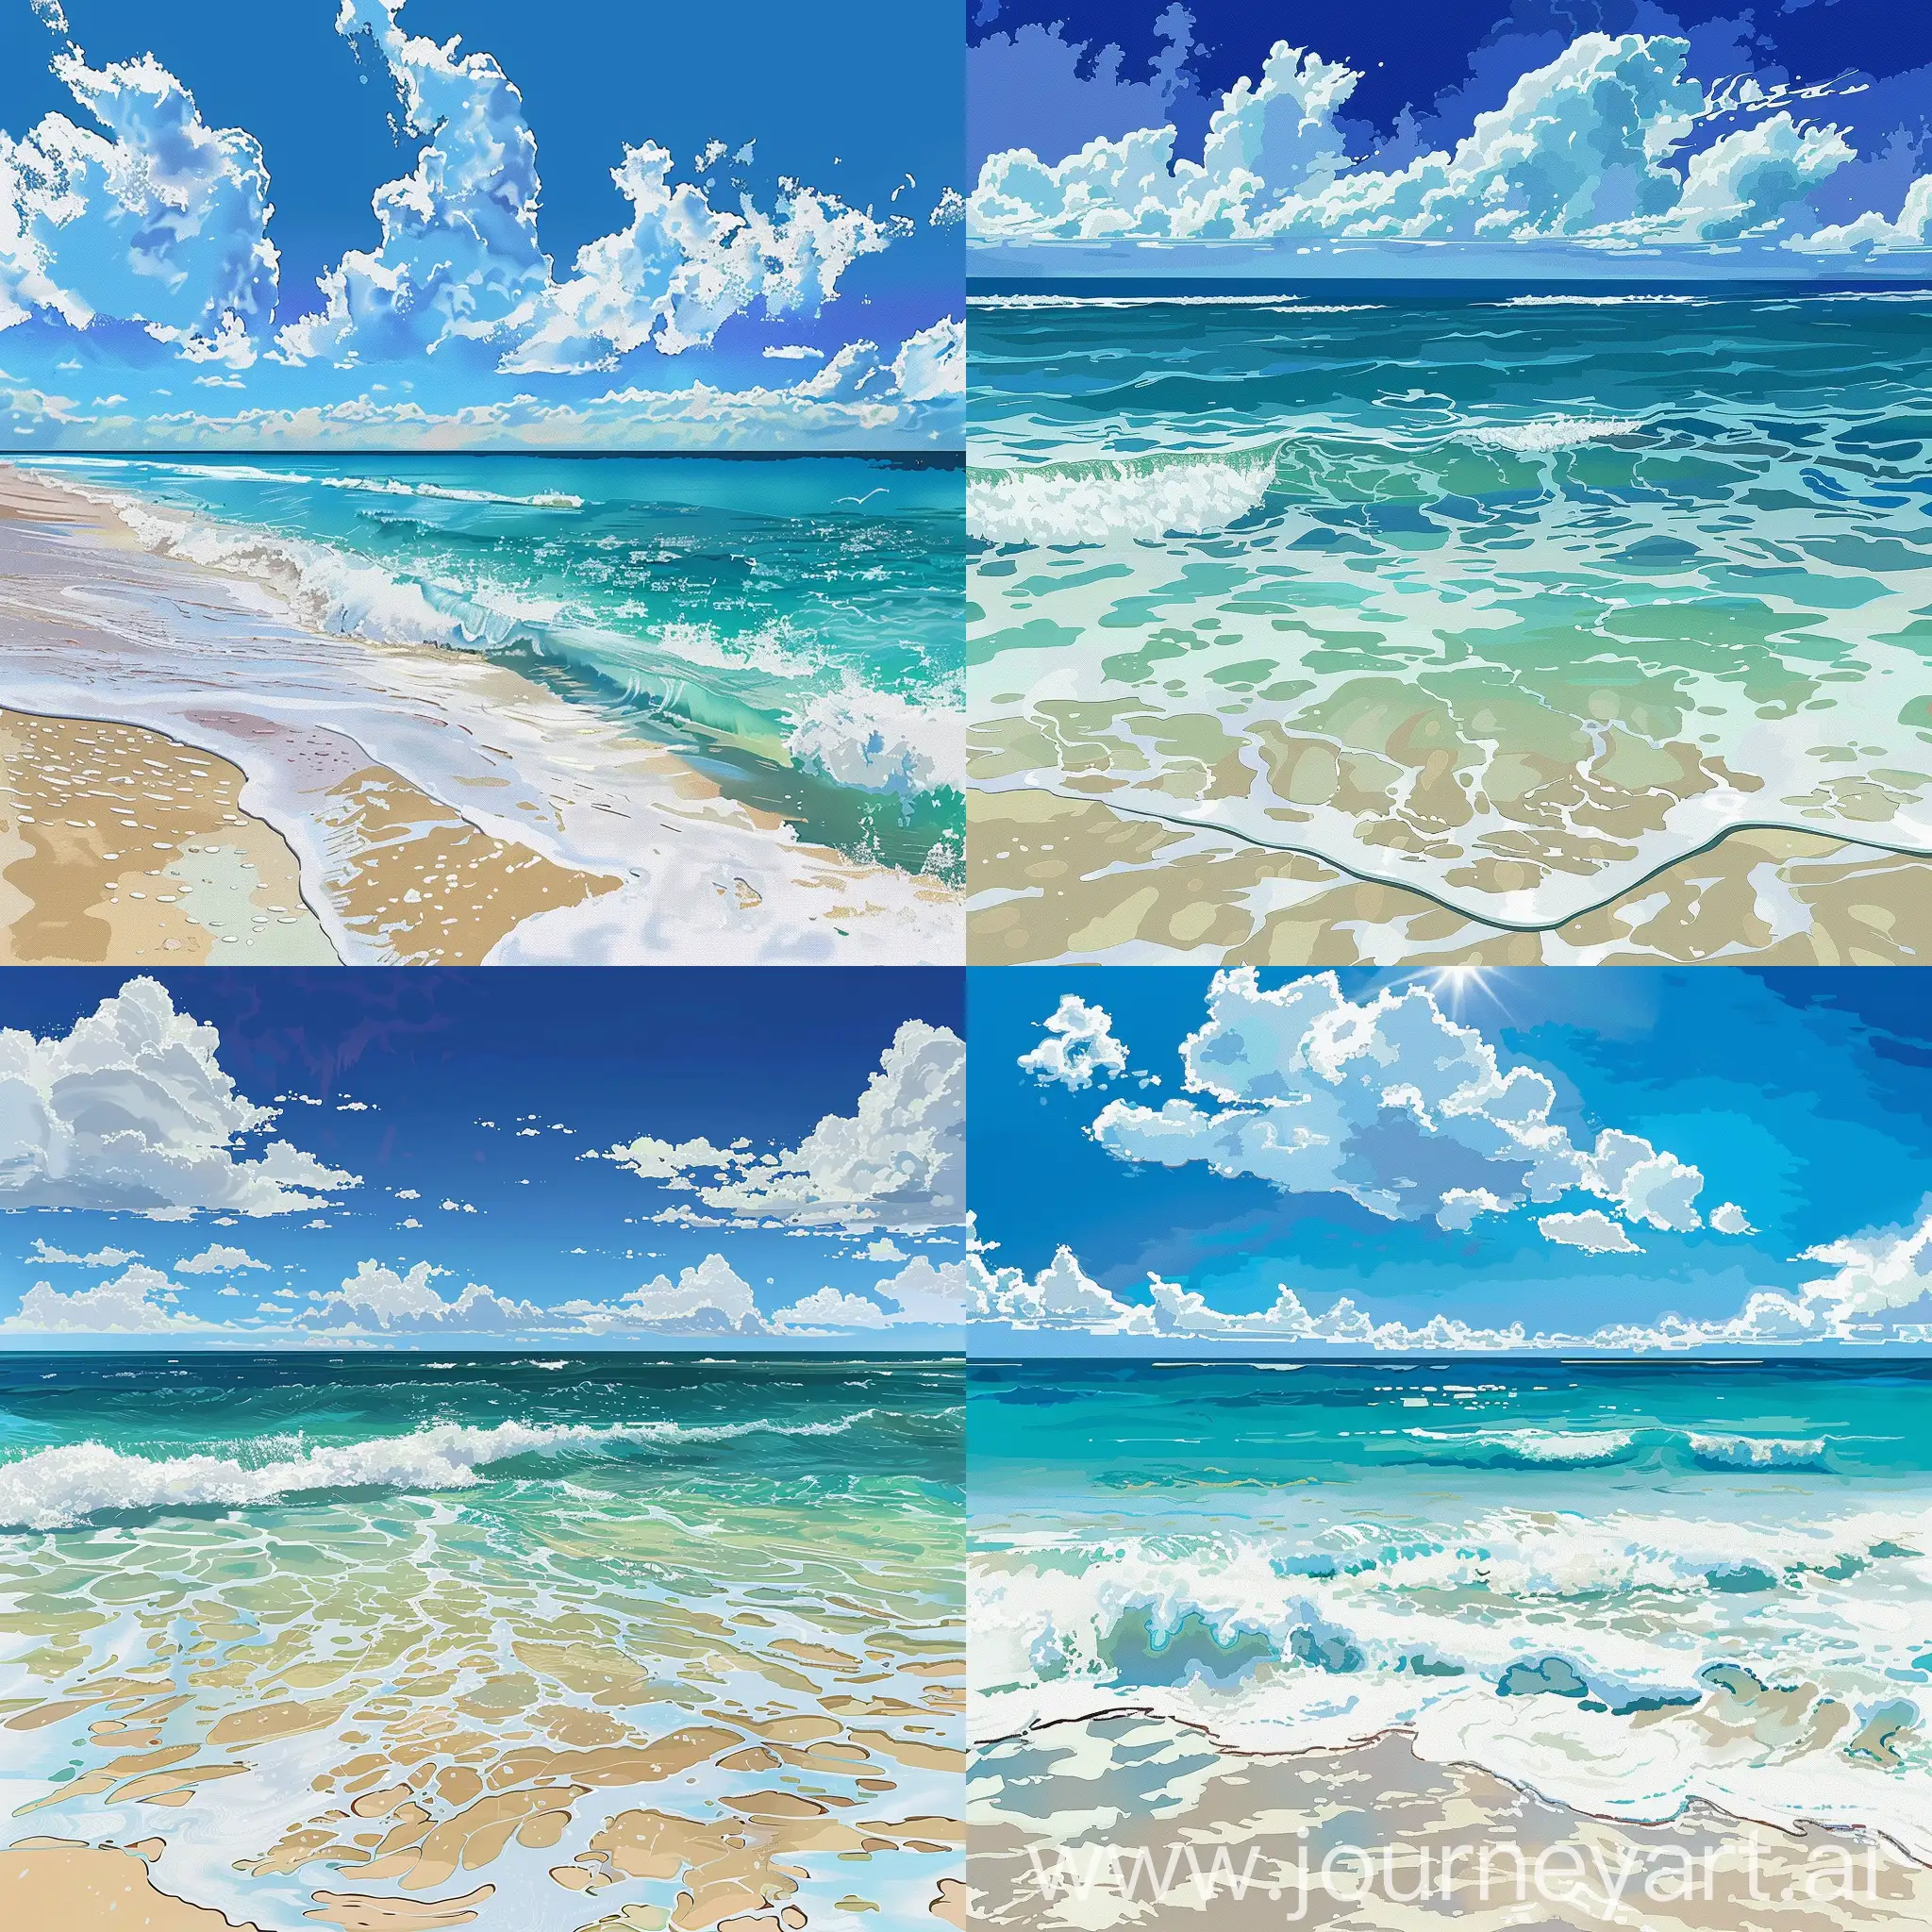 Tranquil-Beach-Scene-with-Overlapping-Ocean-Waves-and-Clear-Blue-Skies